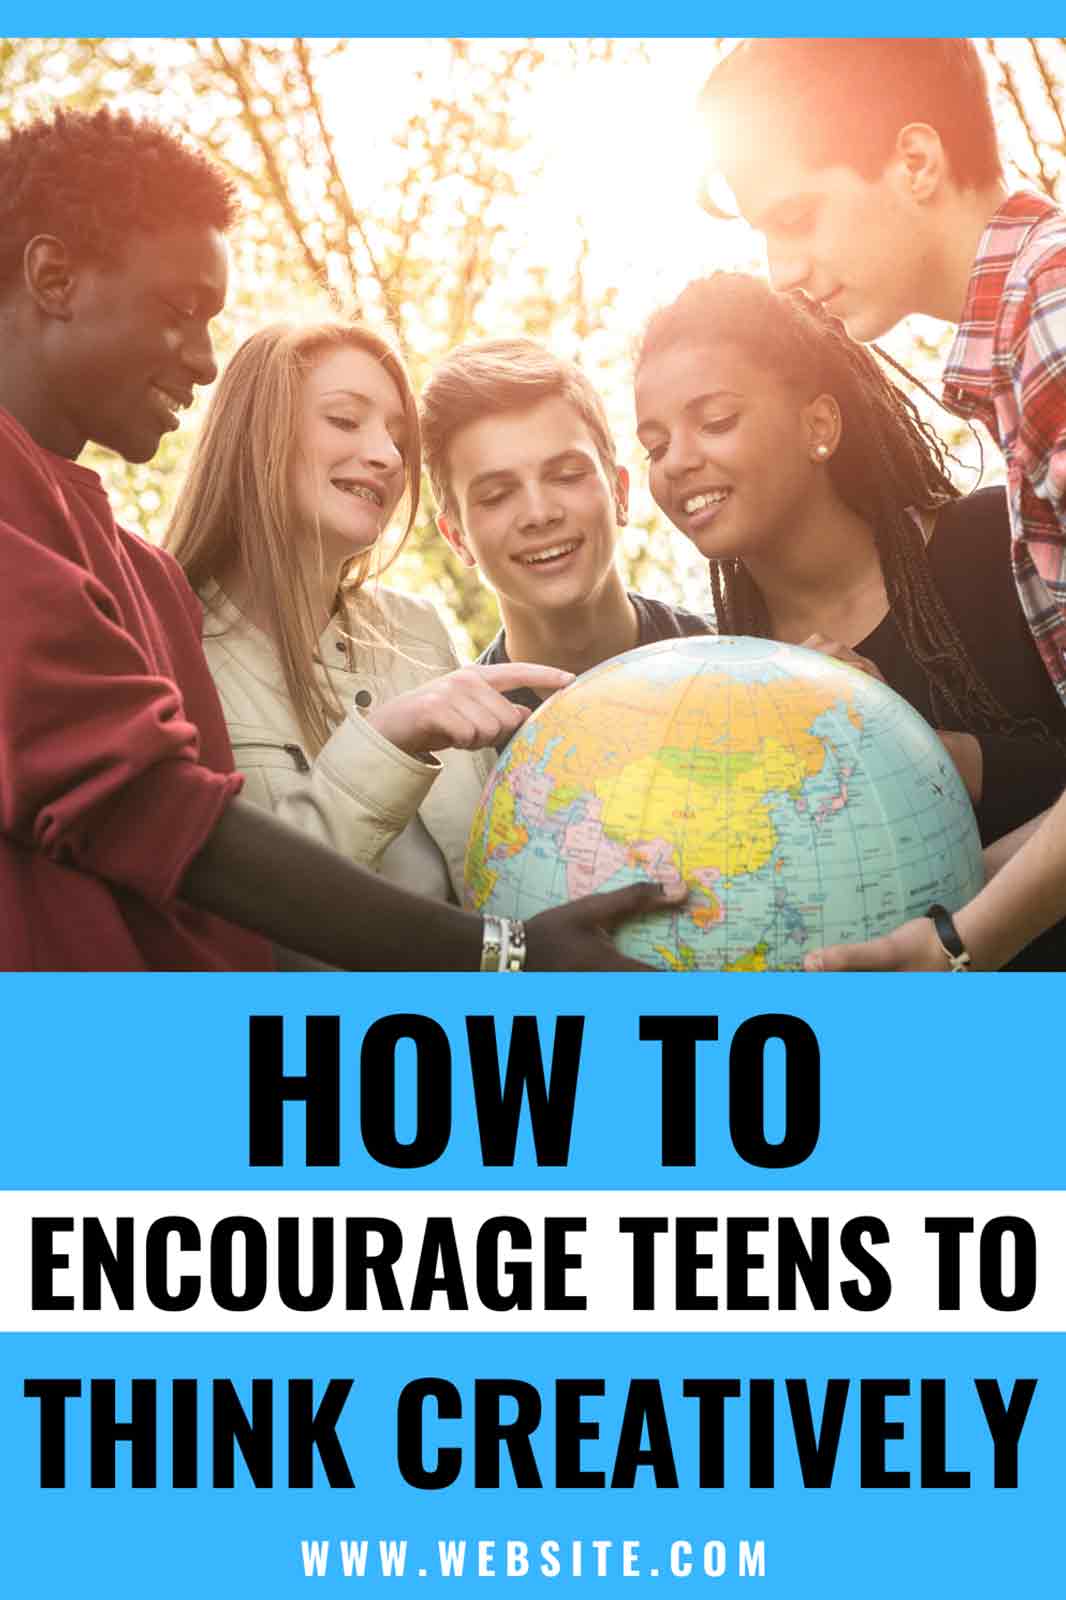 How To Encourage Teens To Think Creatively